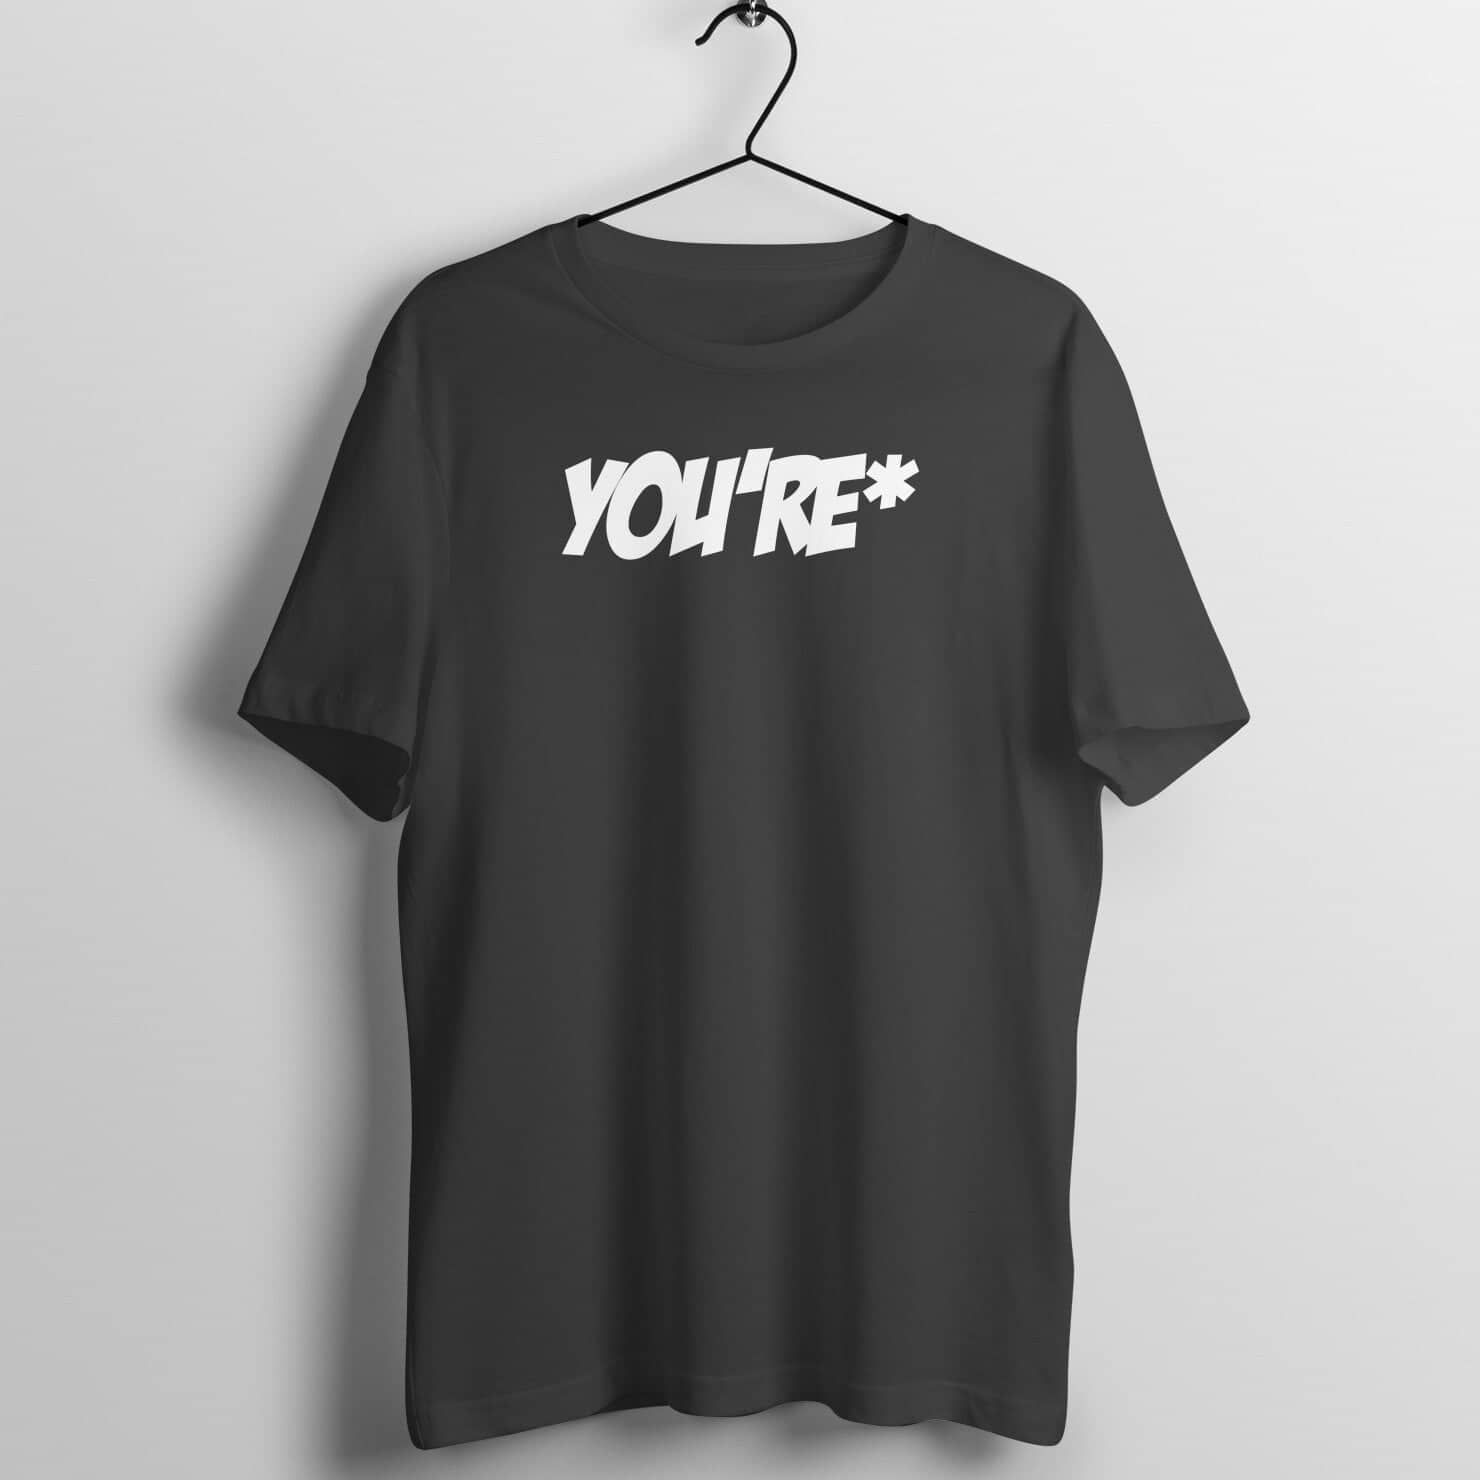 YOU'RE the Correct Grammar Funny Black T Shirt for Men and Women freeshipping - Catch My Drift India